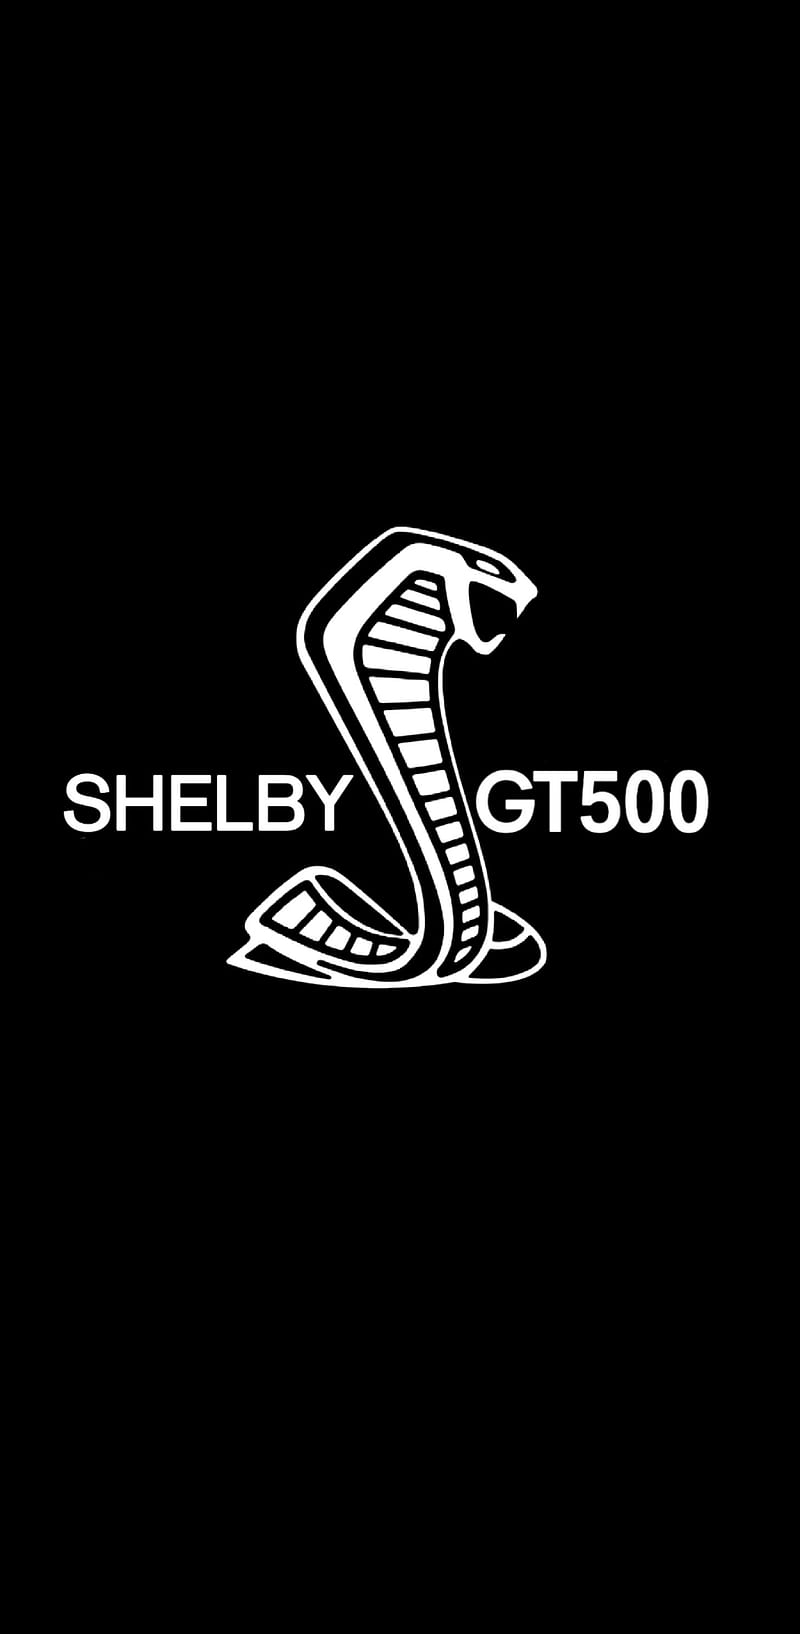 SHELBY GT500, ford mustang shelby gt500, mustang gt500, HD phone wallpaper